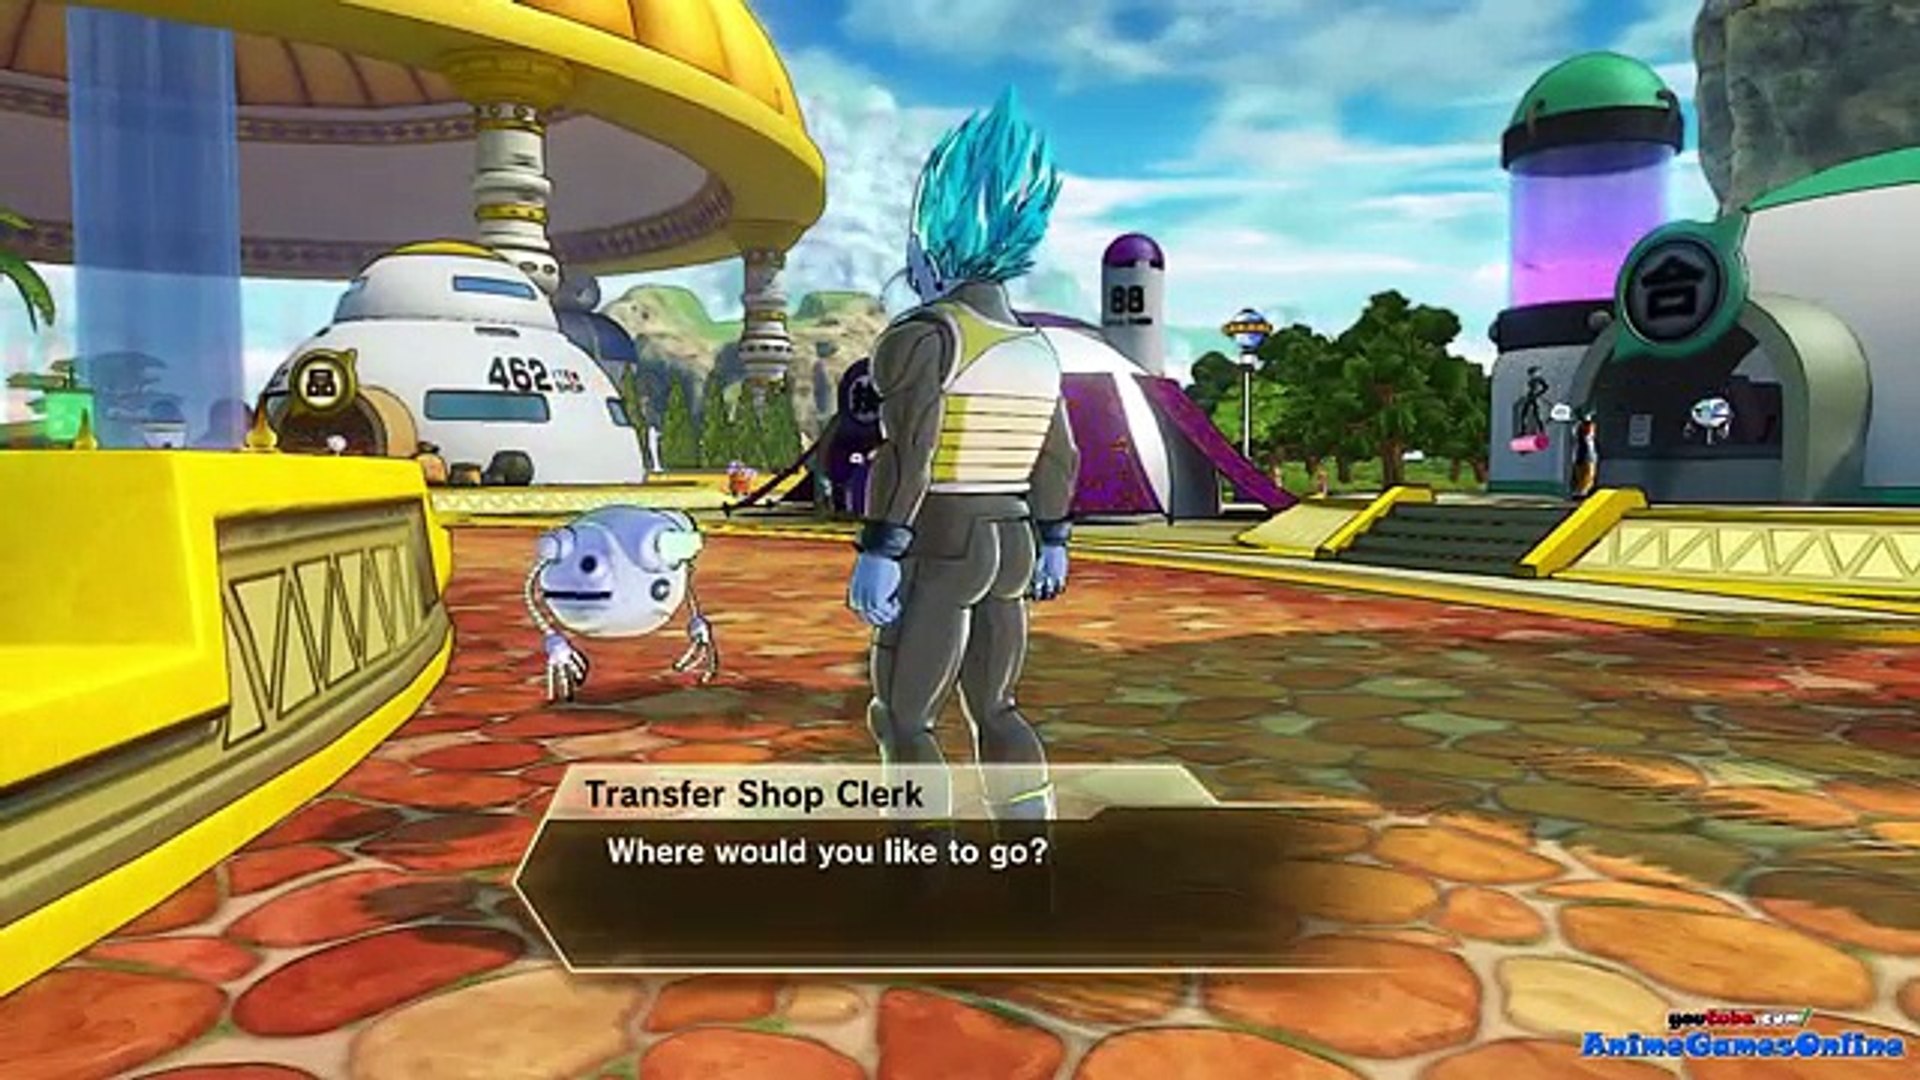 Dragon Ball Xenoverse 2 (How To Play Multiplayer With Unlimited